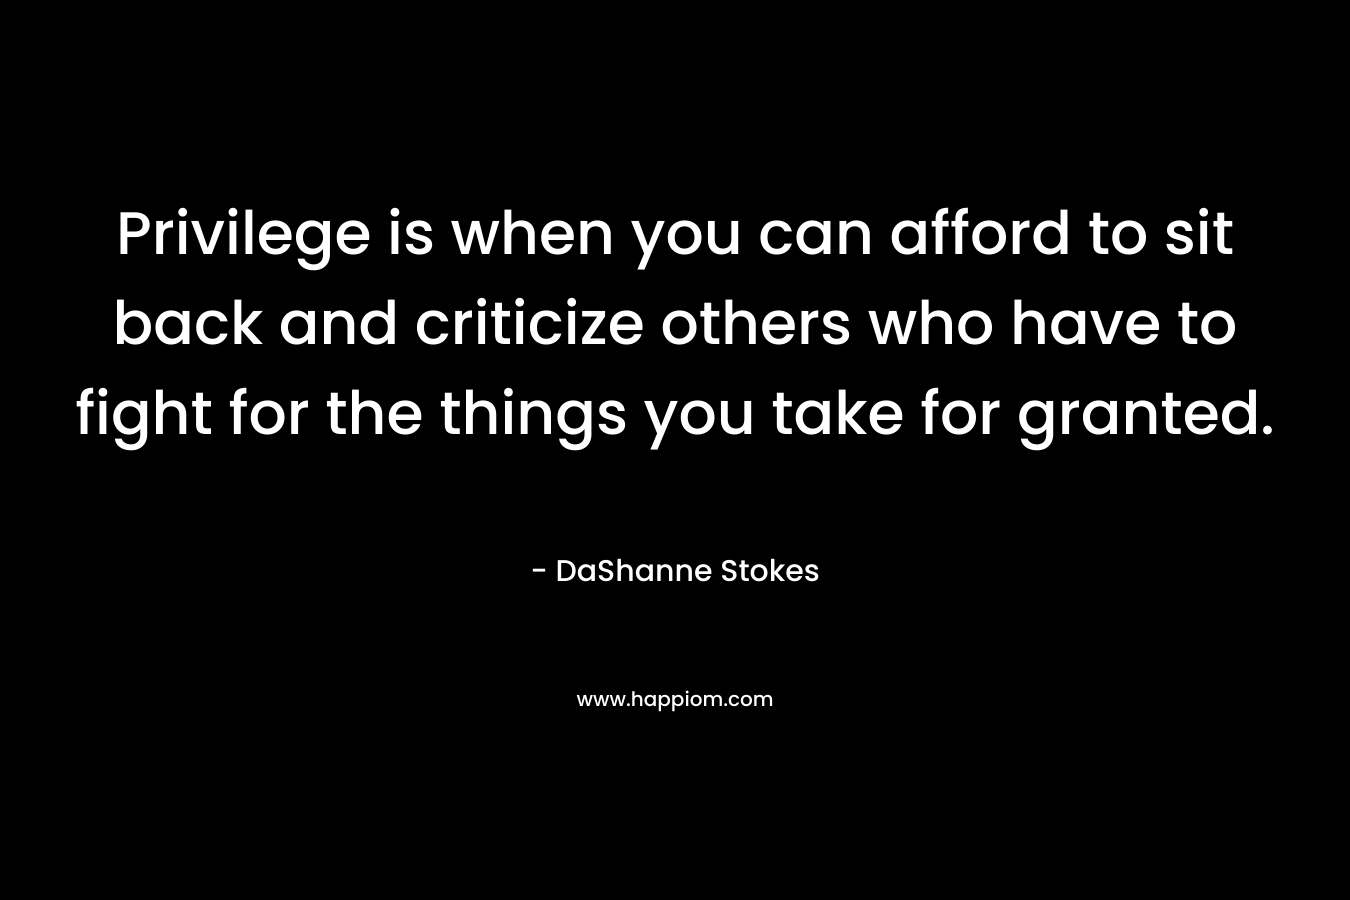 Privilege is when you can afford to sit back and criticize others who have to fight for the things you take for granted.